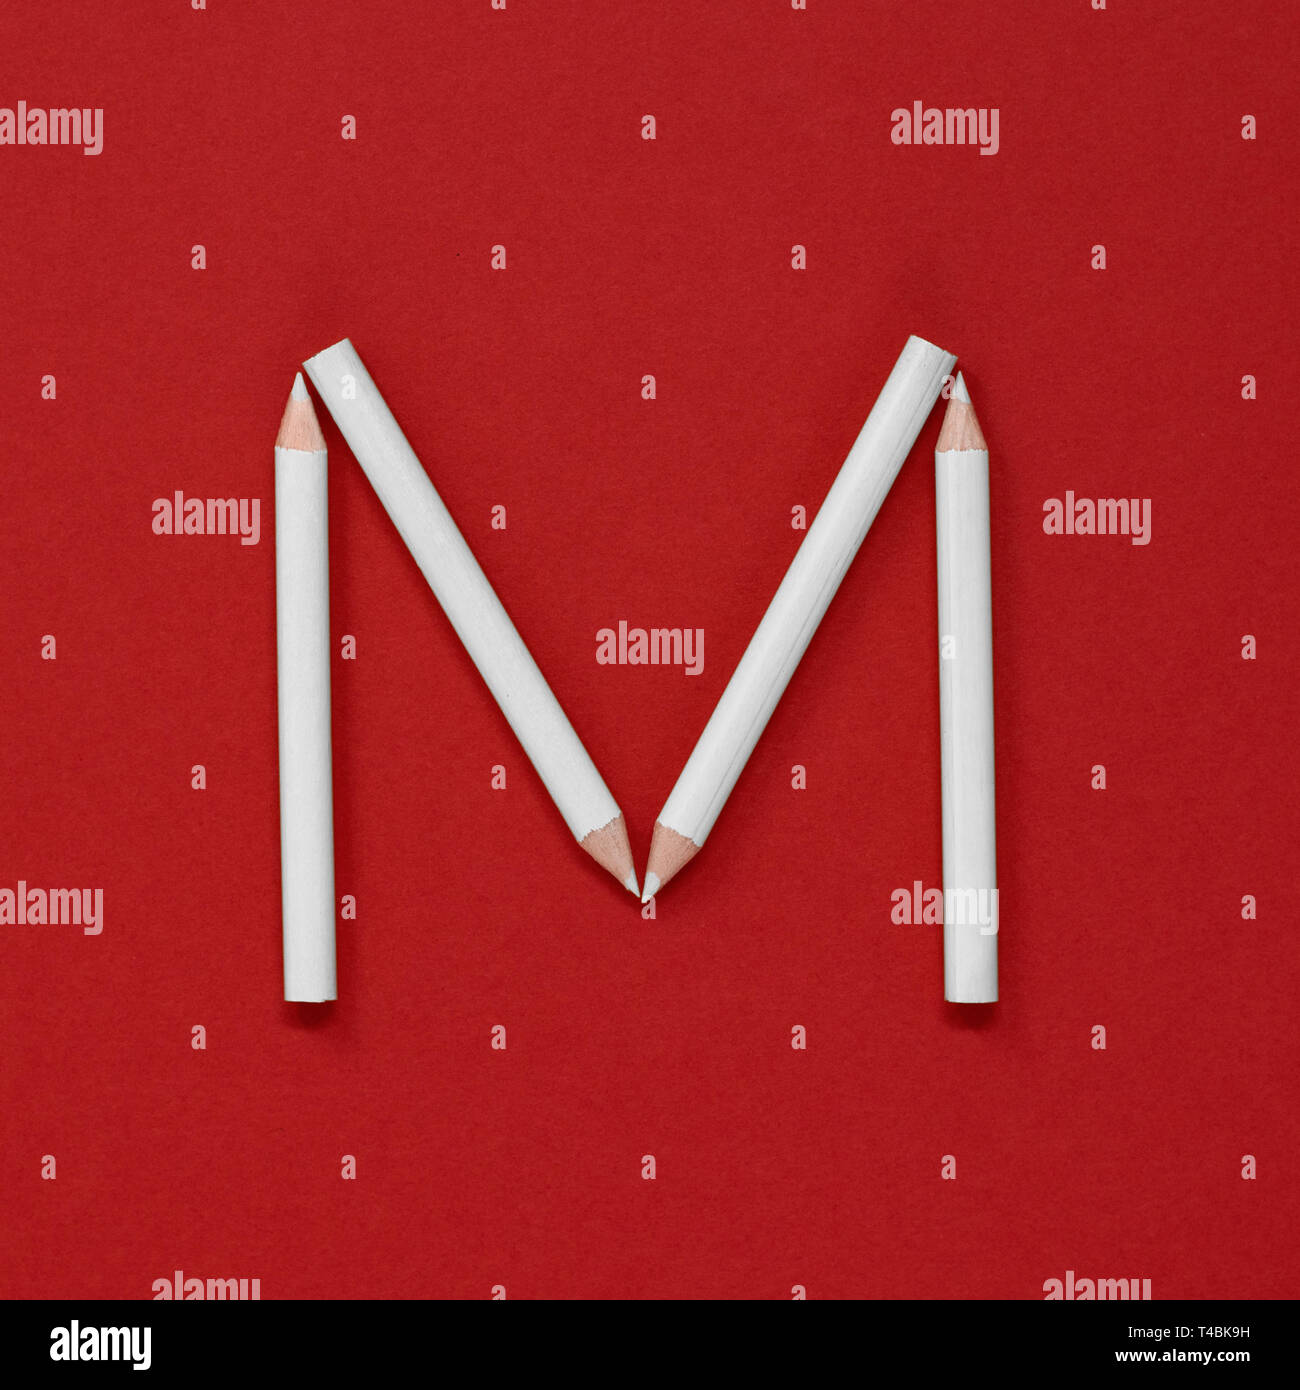 The letter 'M' made from grad-white pencils on a plain red background Stock Photo